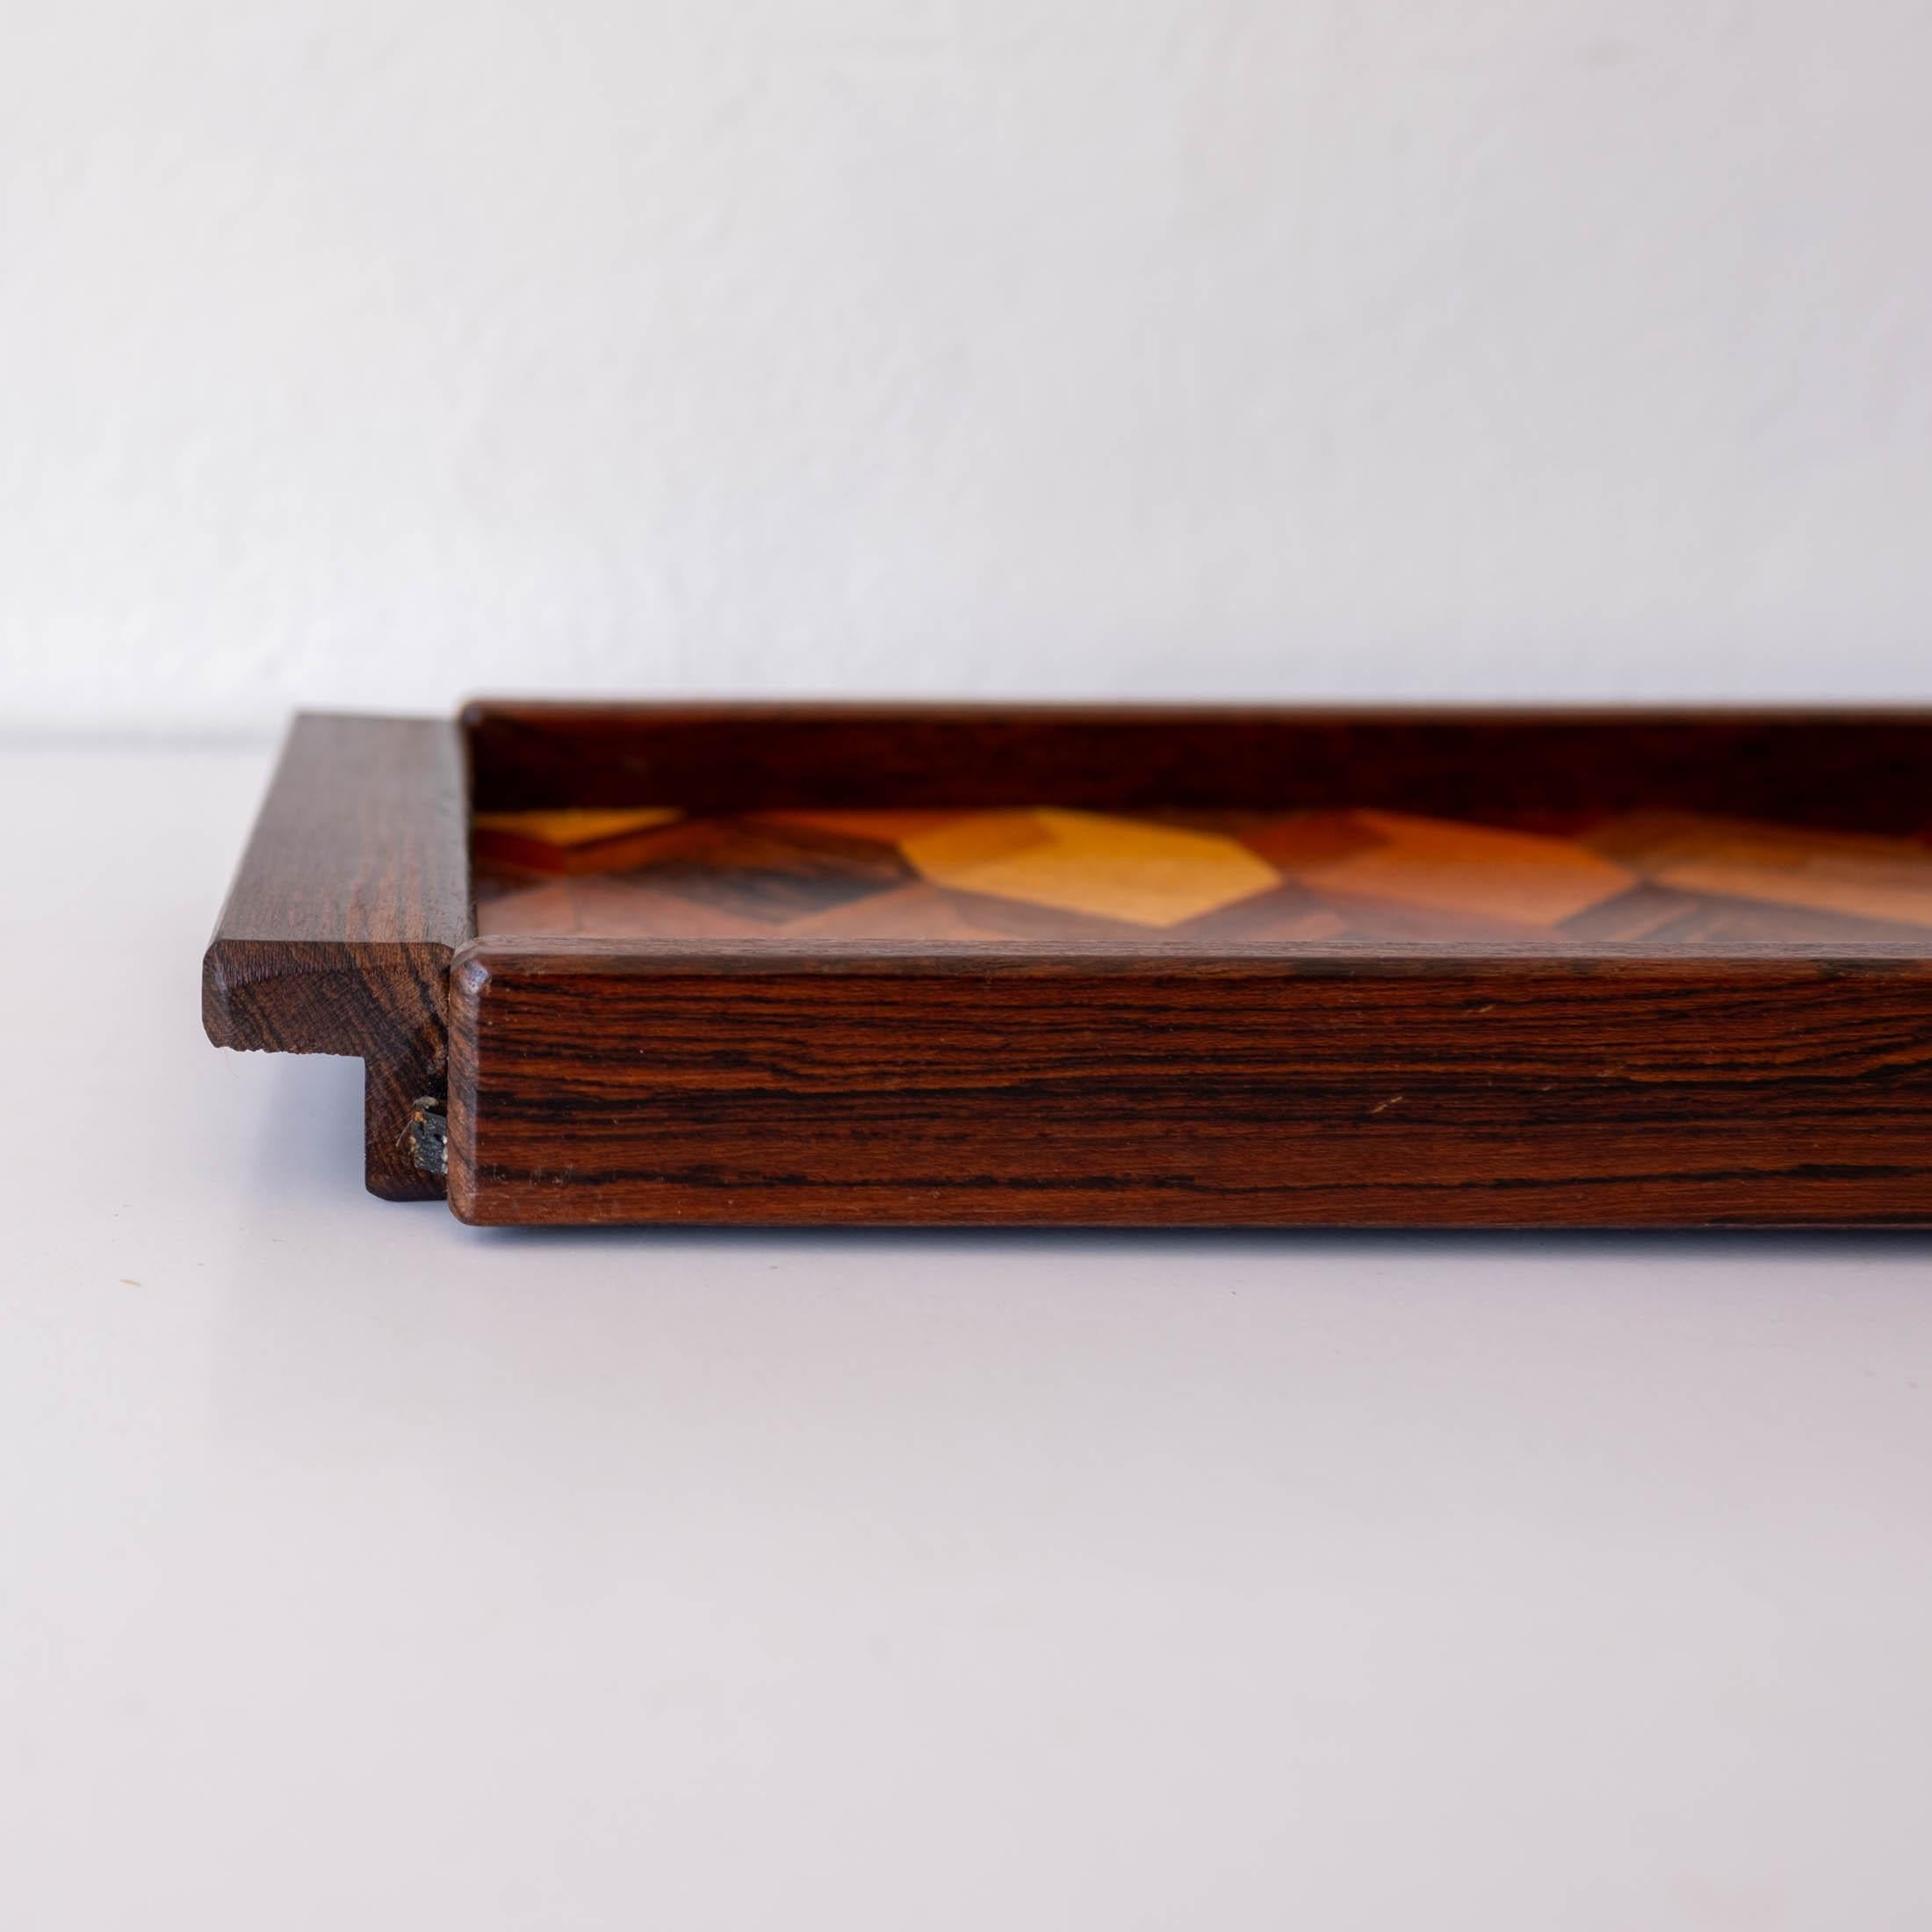 Mid-20th Century Mexican Modern Don Shoemaker Inlaid Wall Mount Bar Tray For Sale